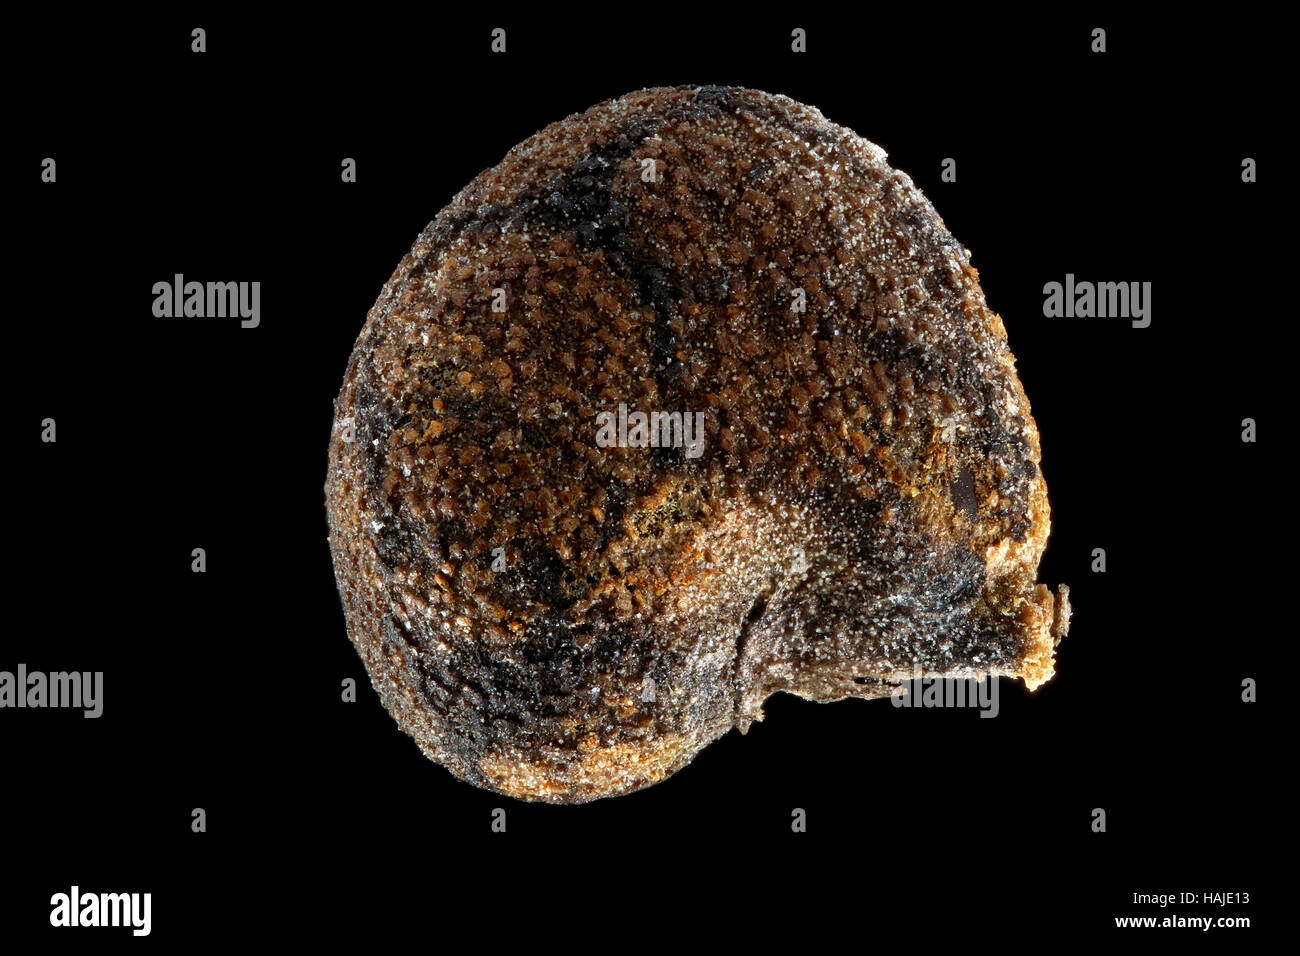 Anoda cristata, Spurred anoda, Crested anoda, seed, close up, seed size 2-3 mm Stock Photo